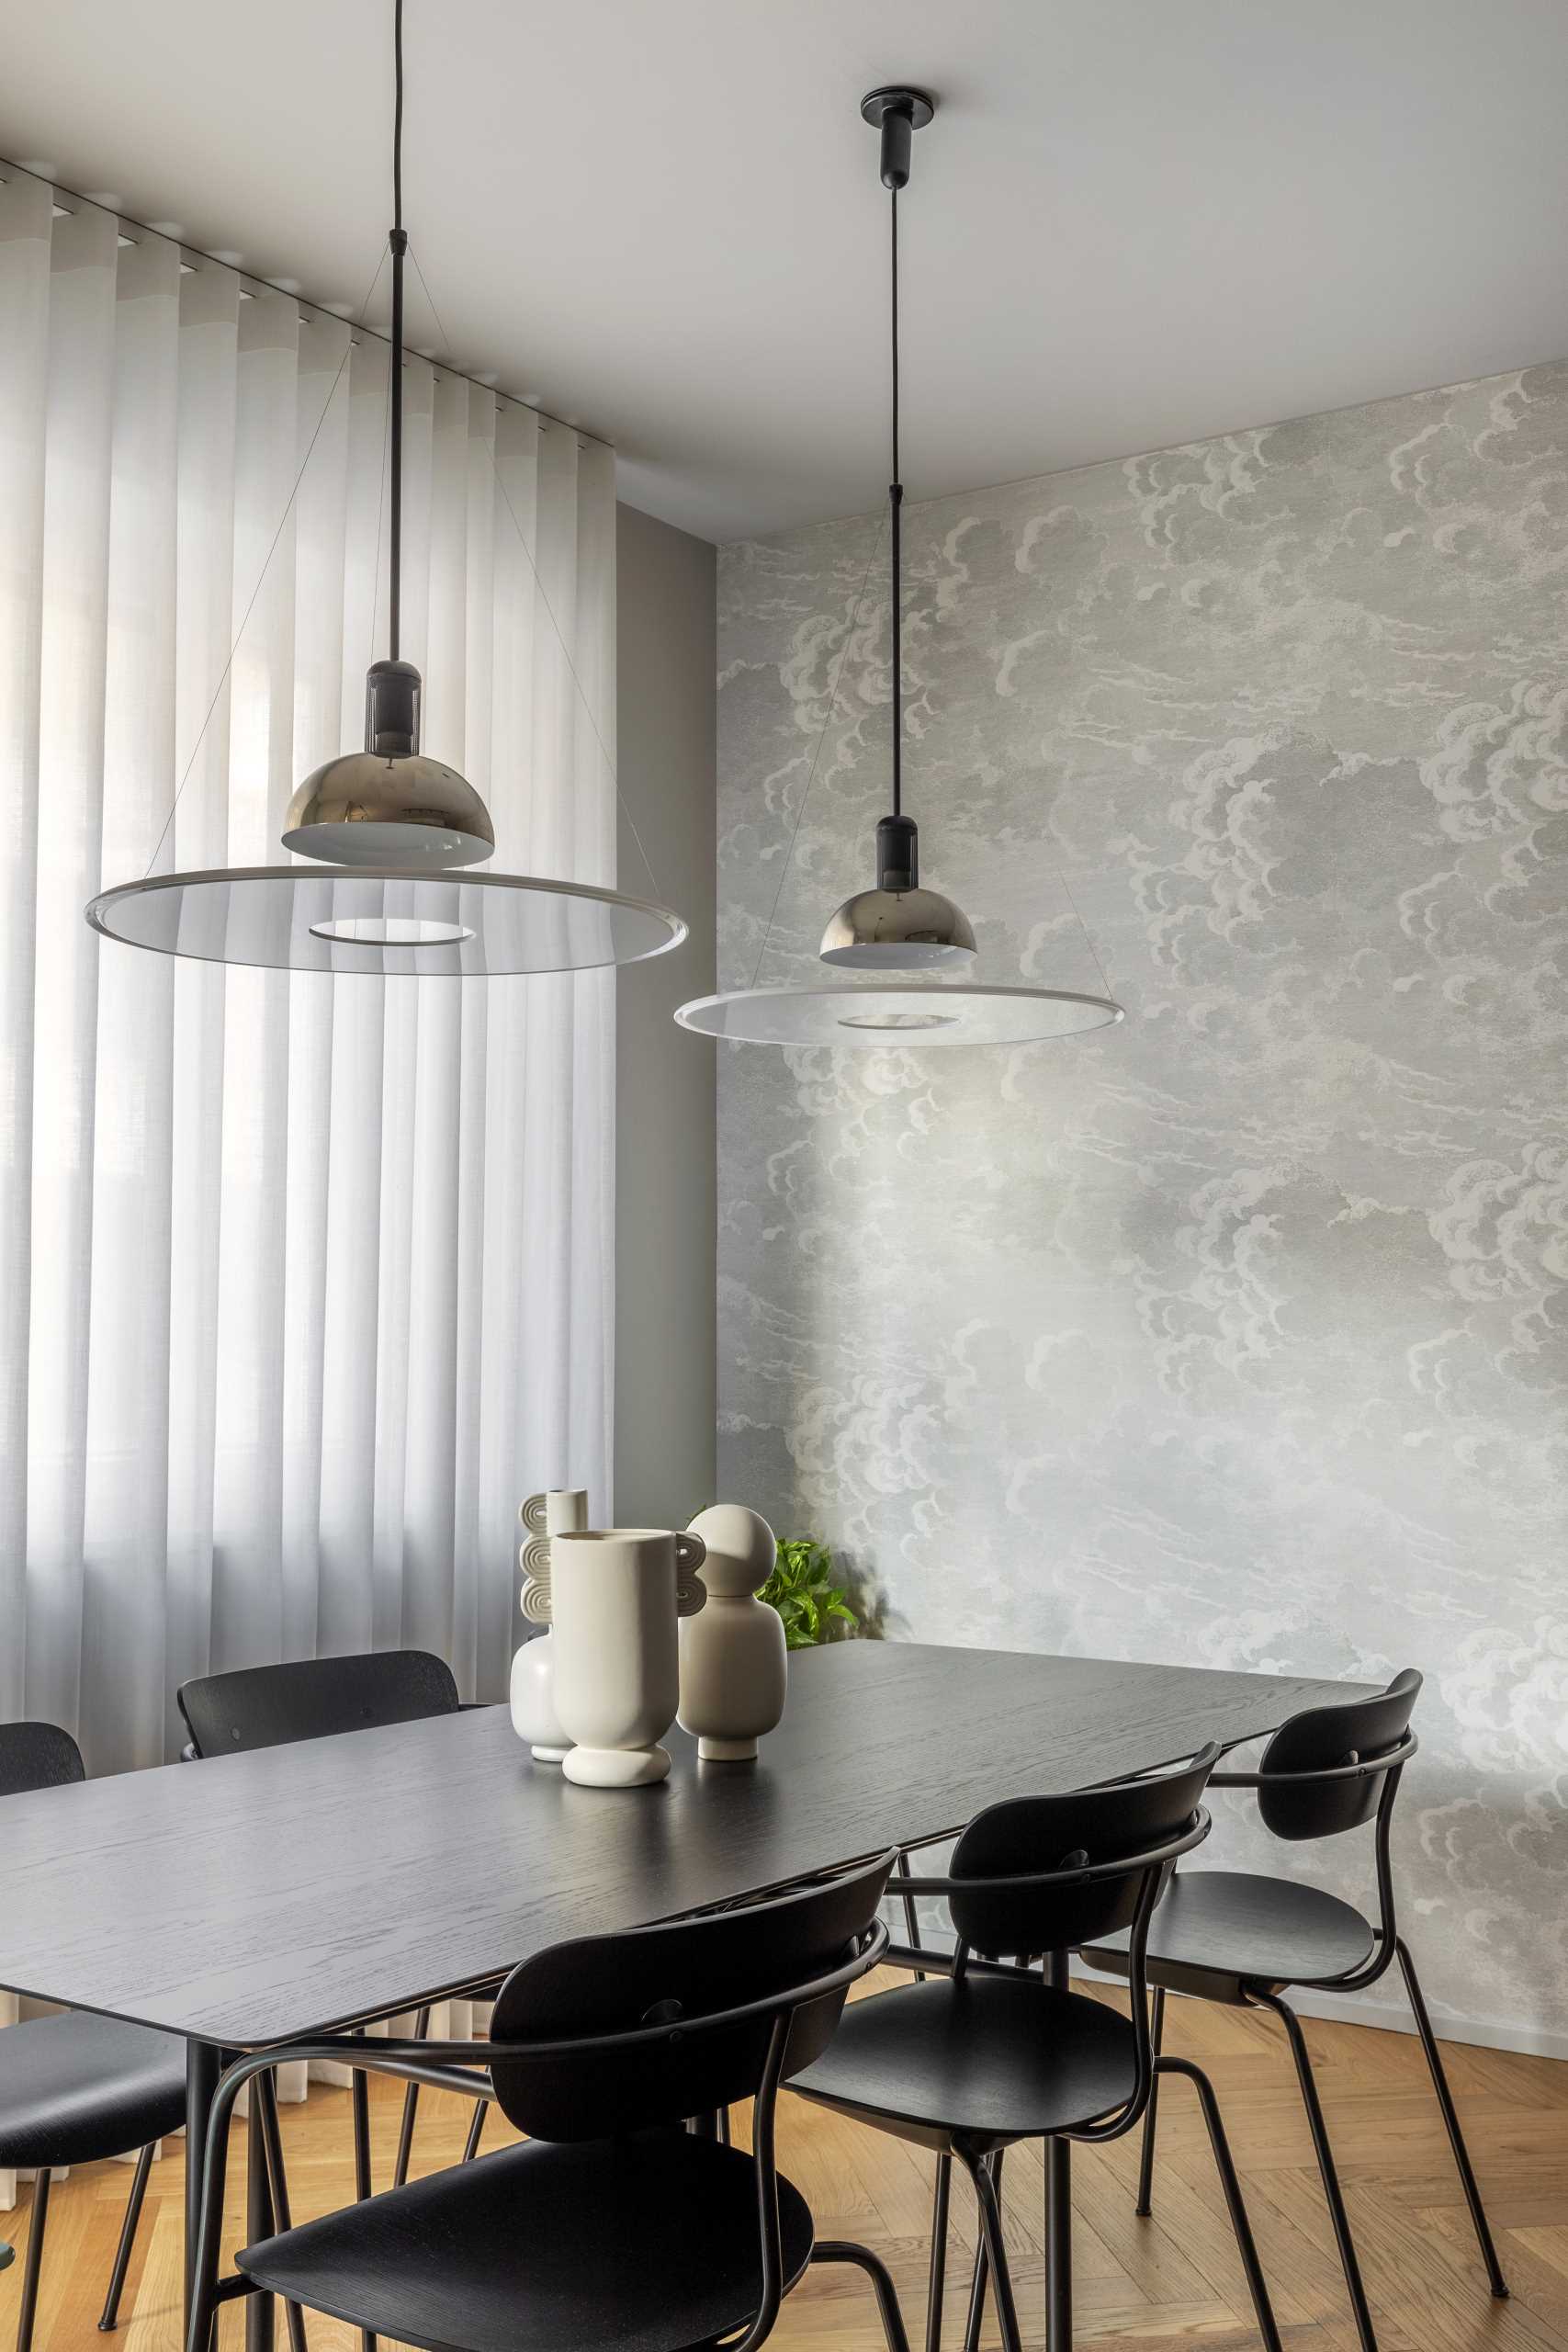 Wallpaper lines the wall that spans the kitchen and the dining area, adding a subtle elegant touch to the interior.